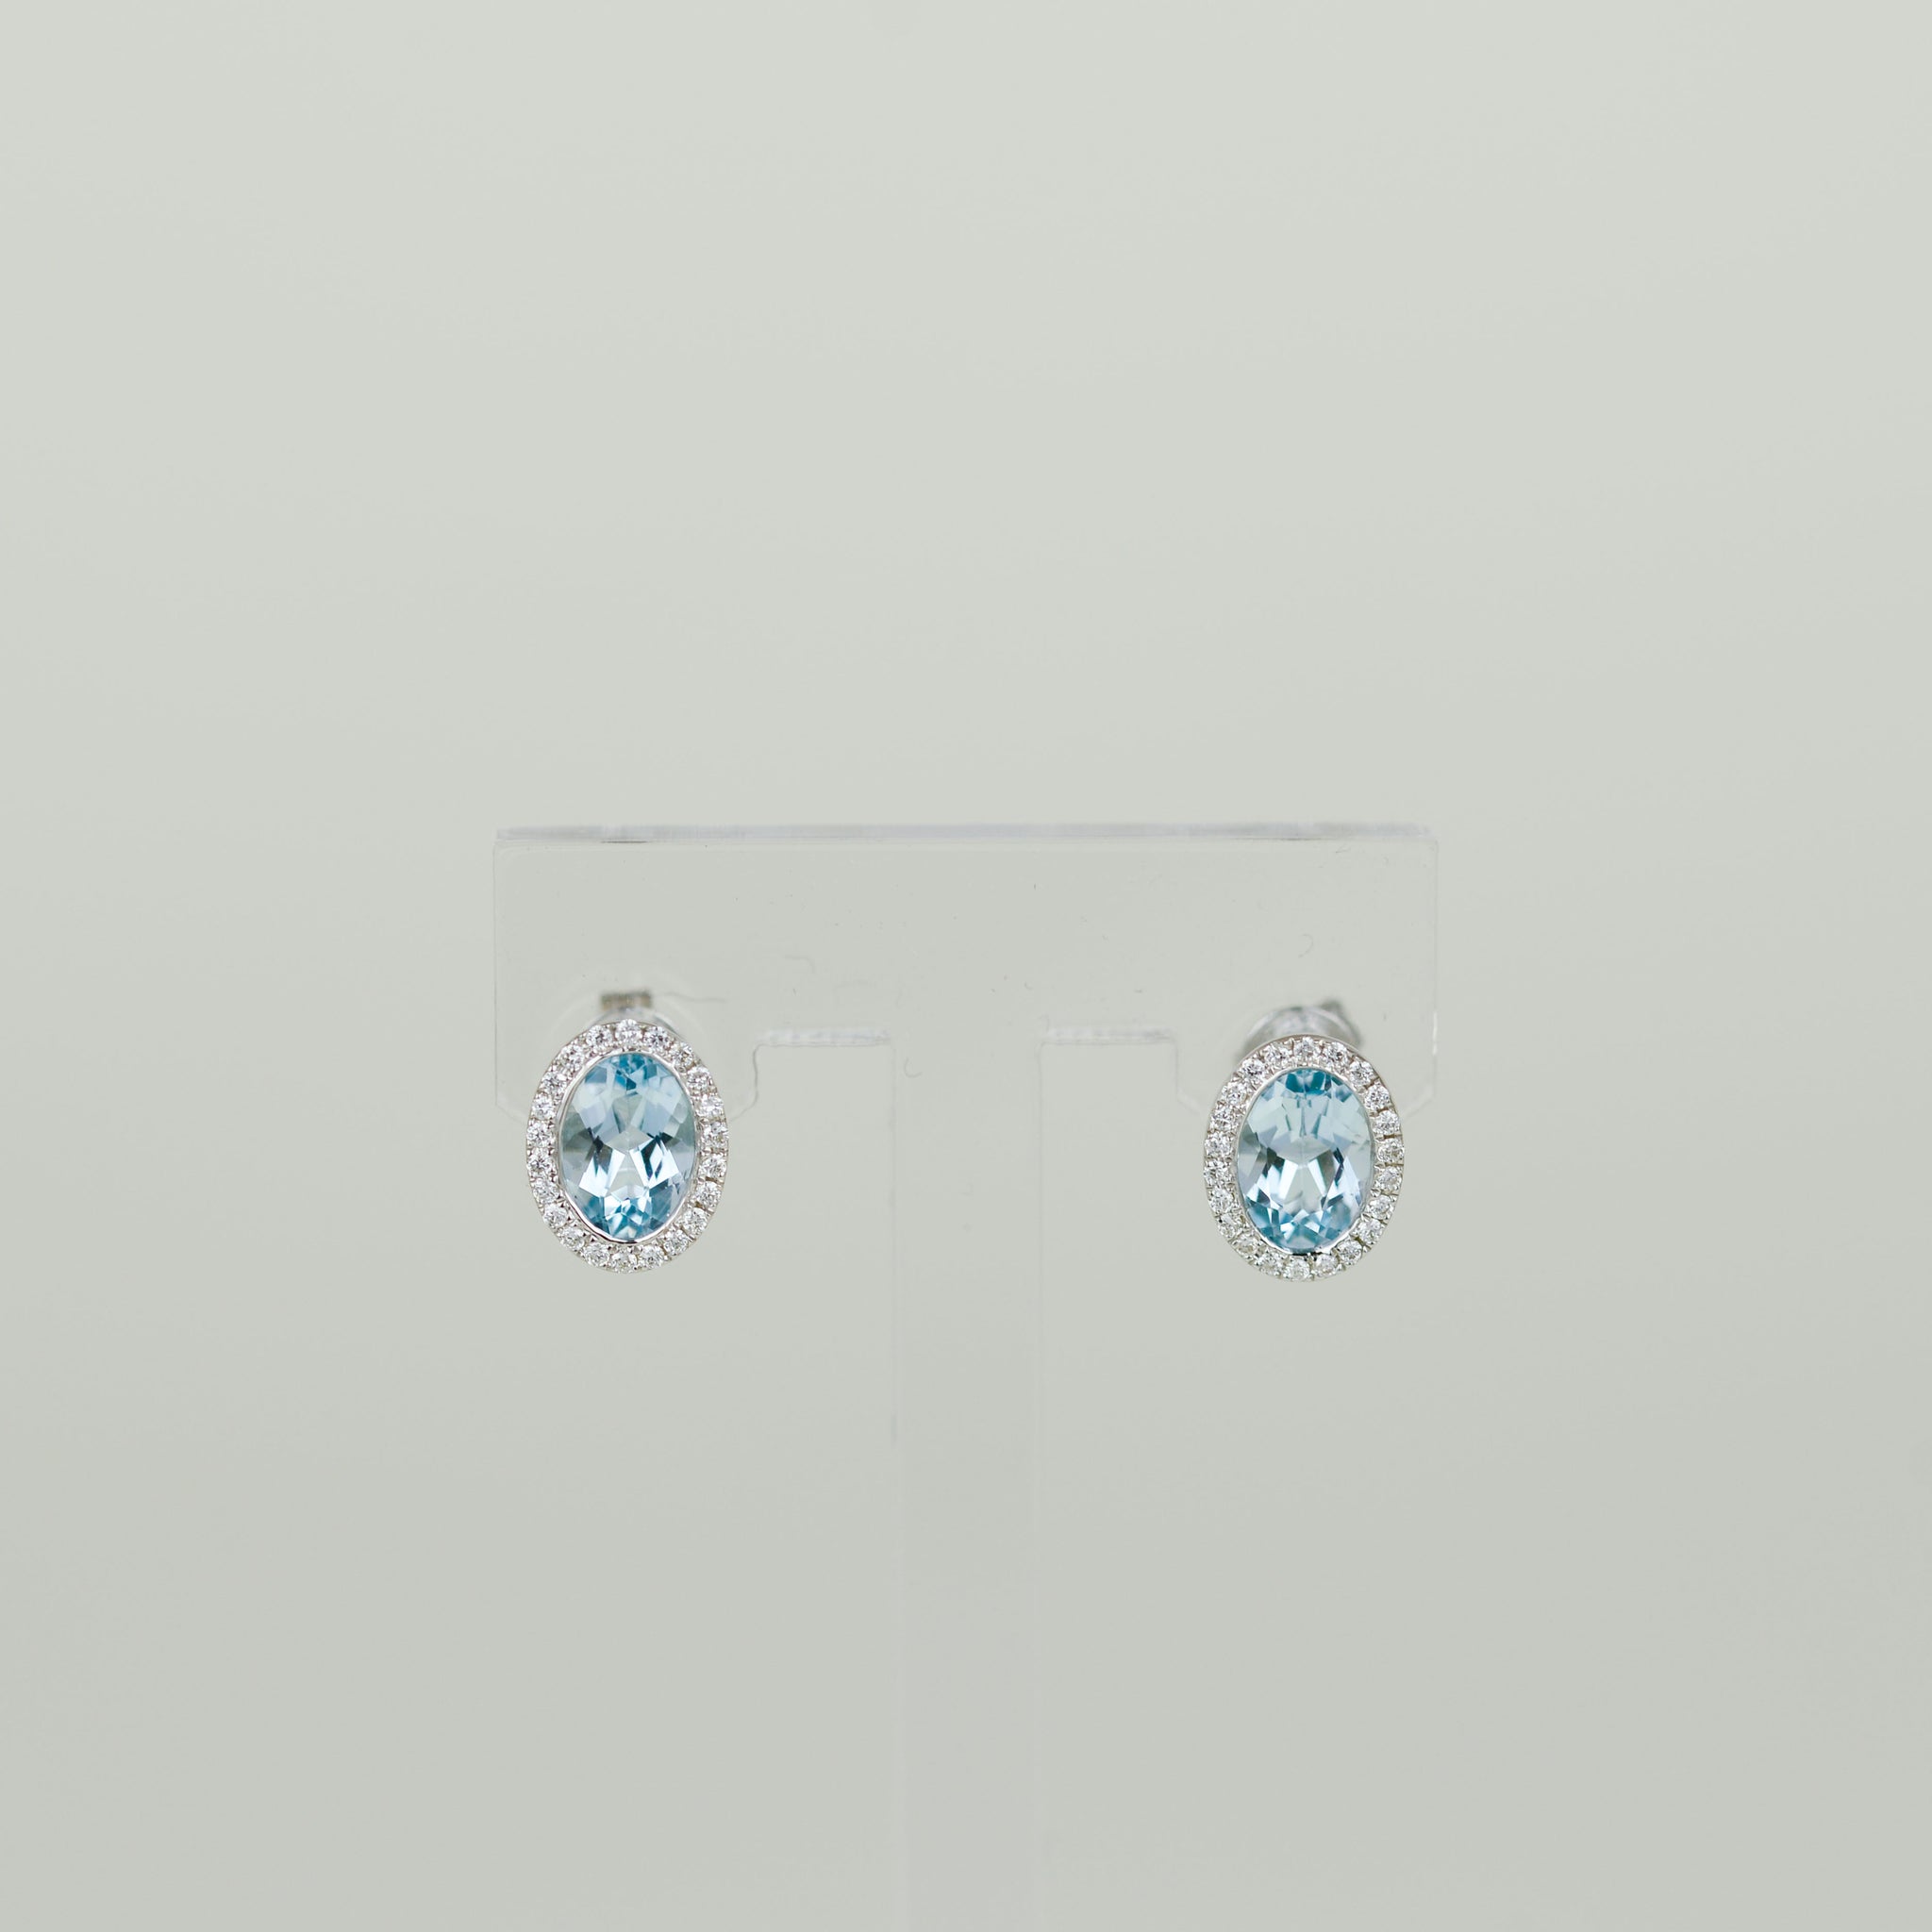 9ct White Gold 1.80ct Oval Blue Topaz and Diamond Halo Stud Earrings